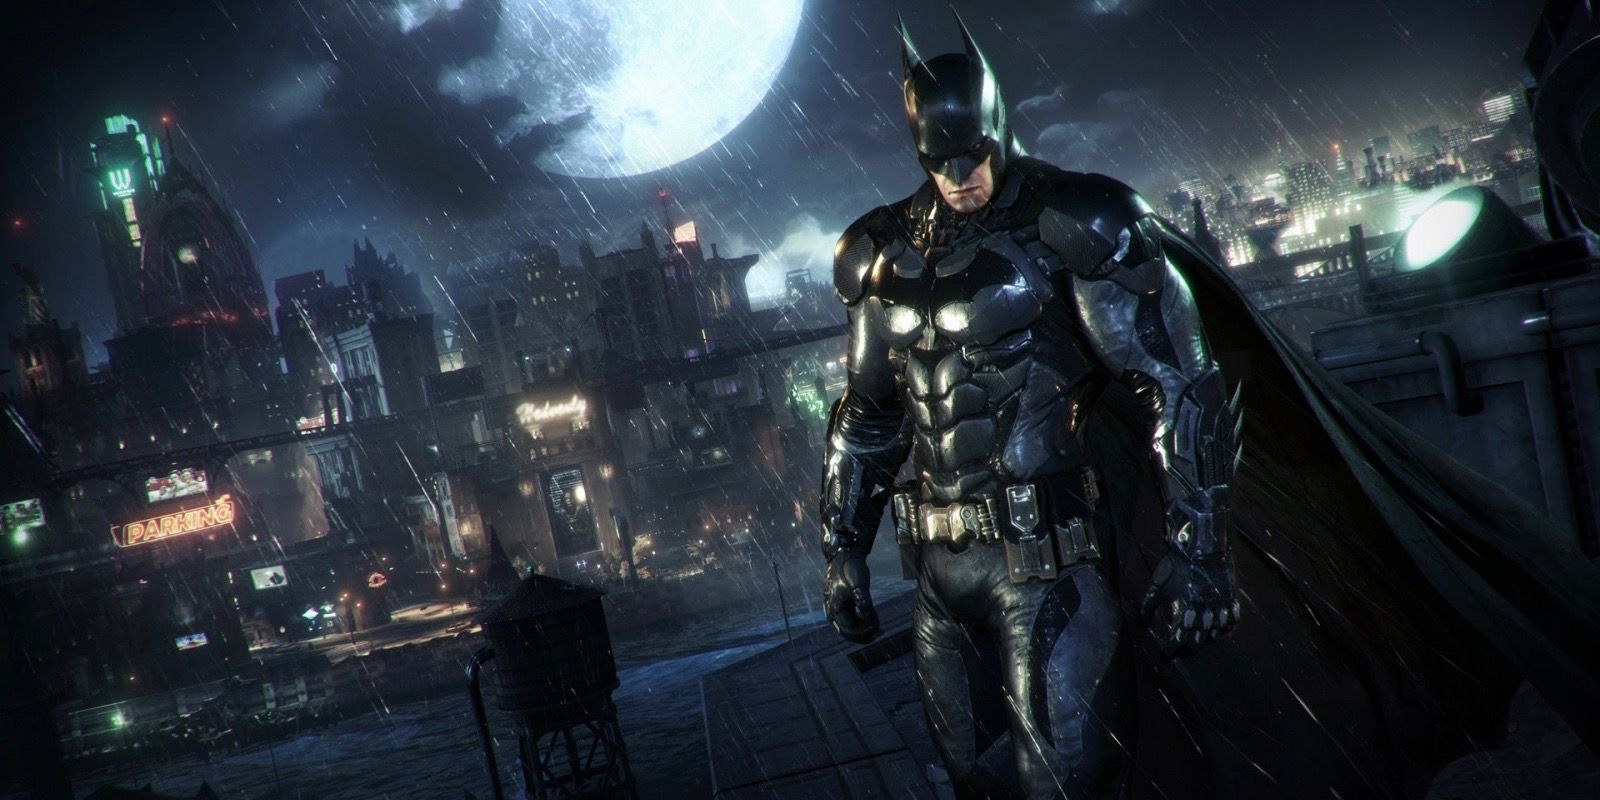 Batman standing atop a building at night with Gotham's cityscape behind him